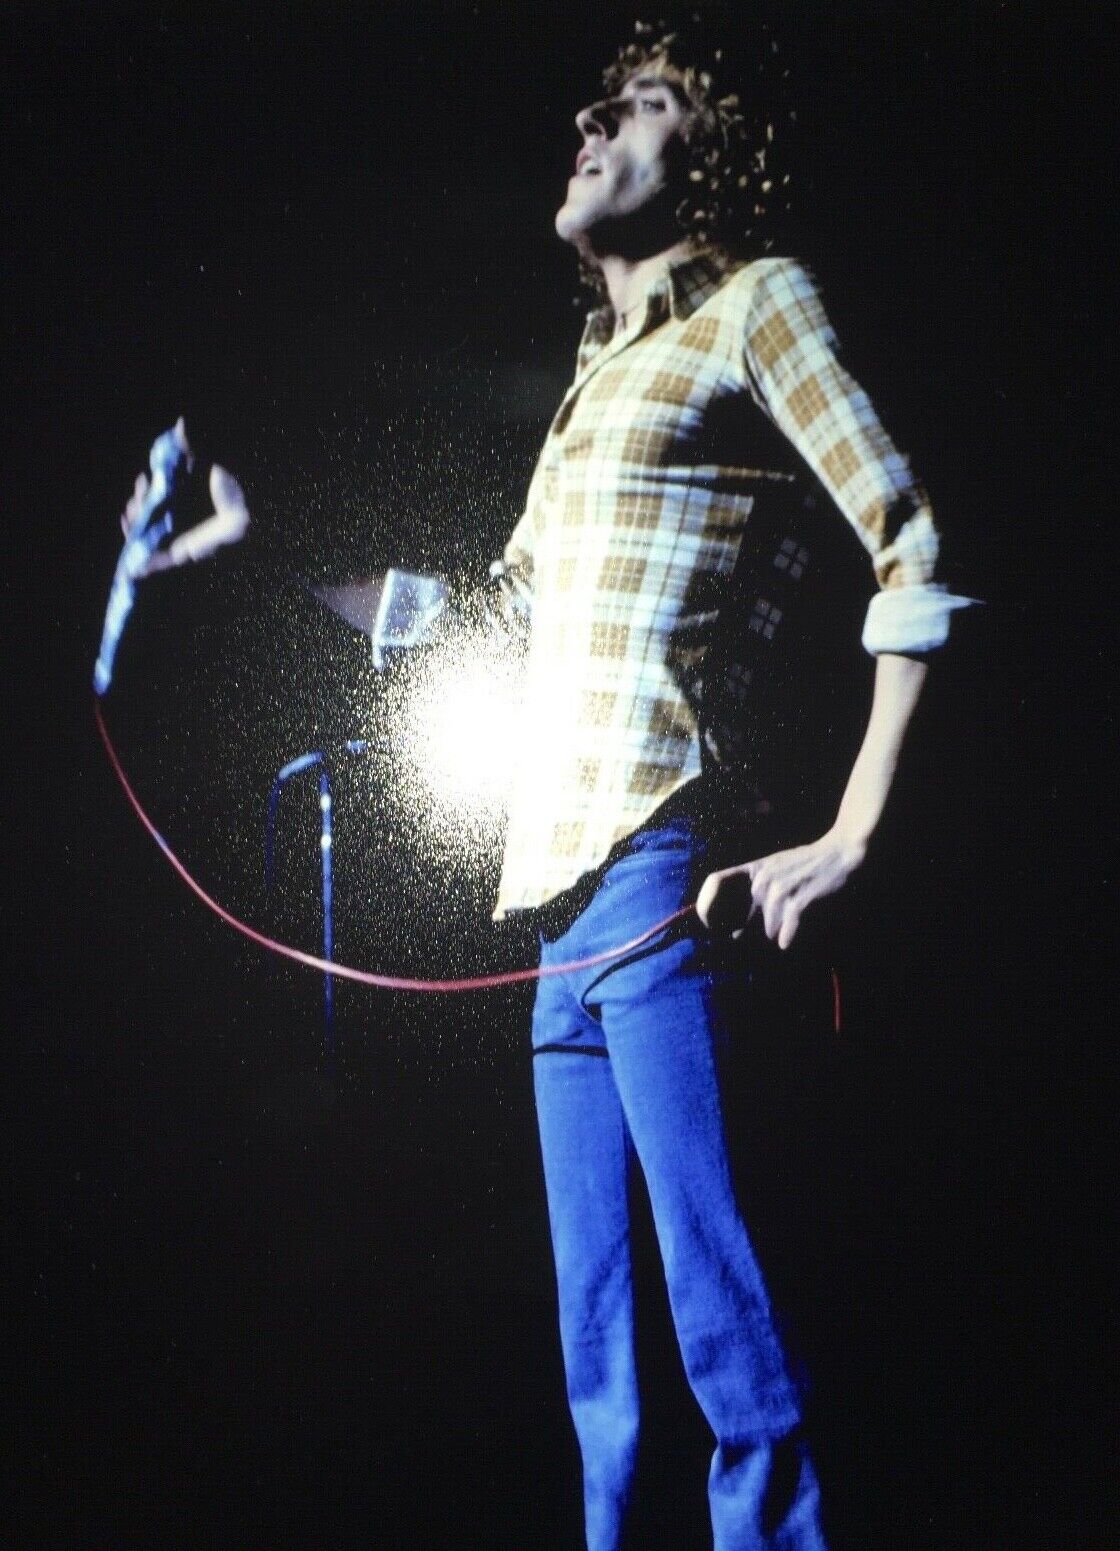 ROGER DALTRY - THE WHO - CHART TOPPING BAND - BRILLIANT UNSIGNED Photo Poster paintingGRAPH